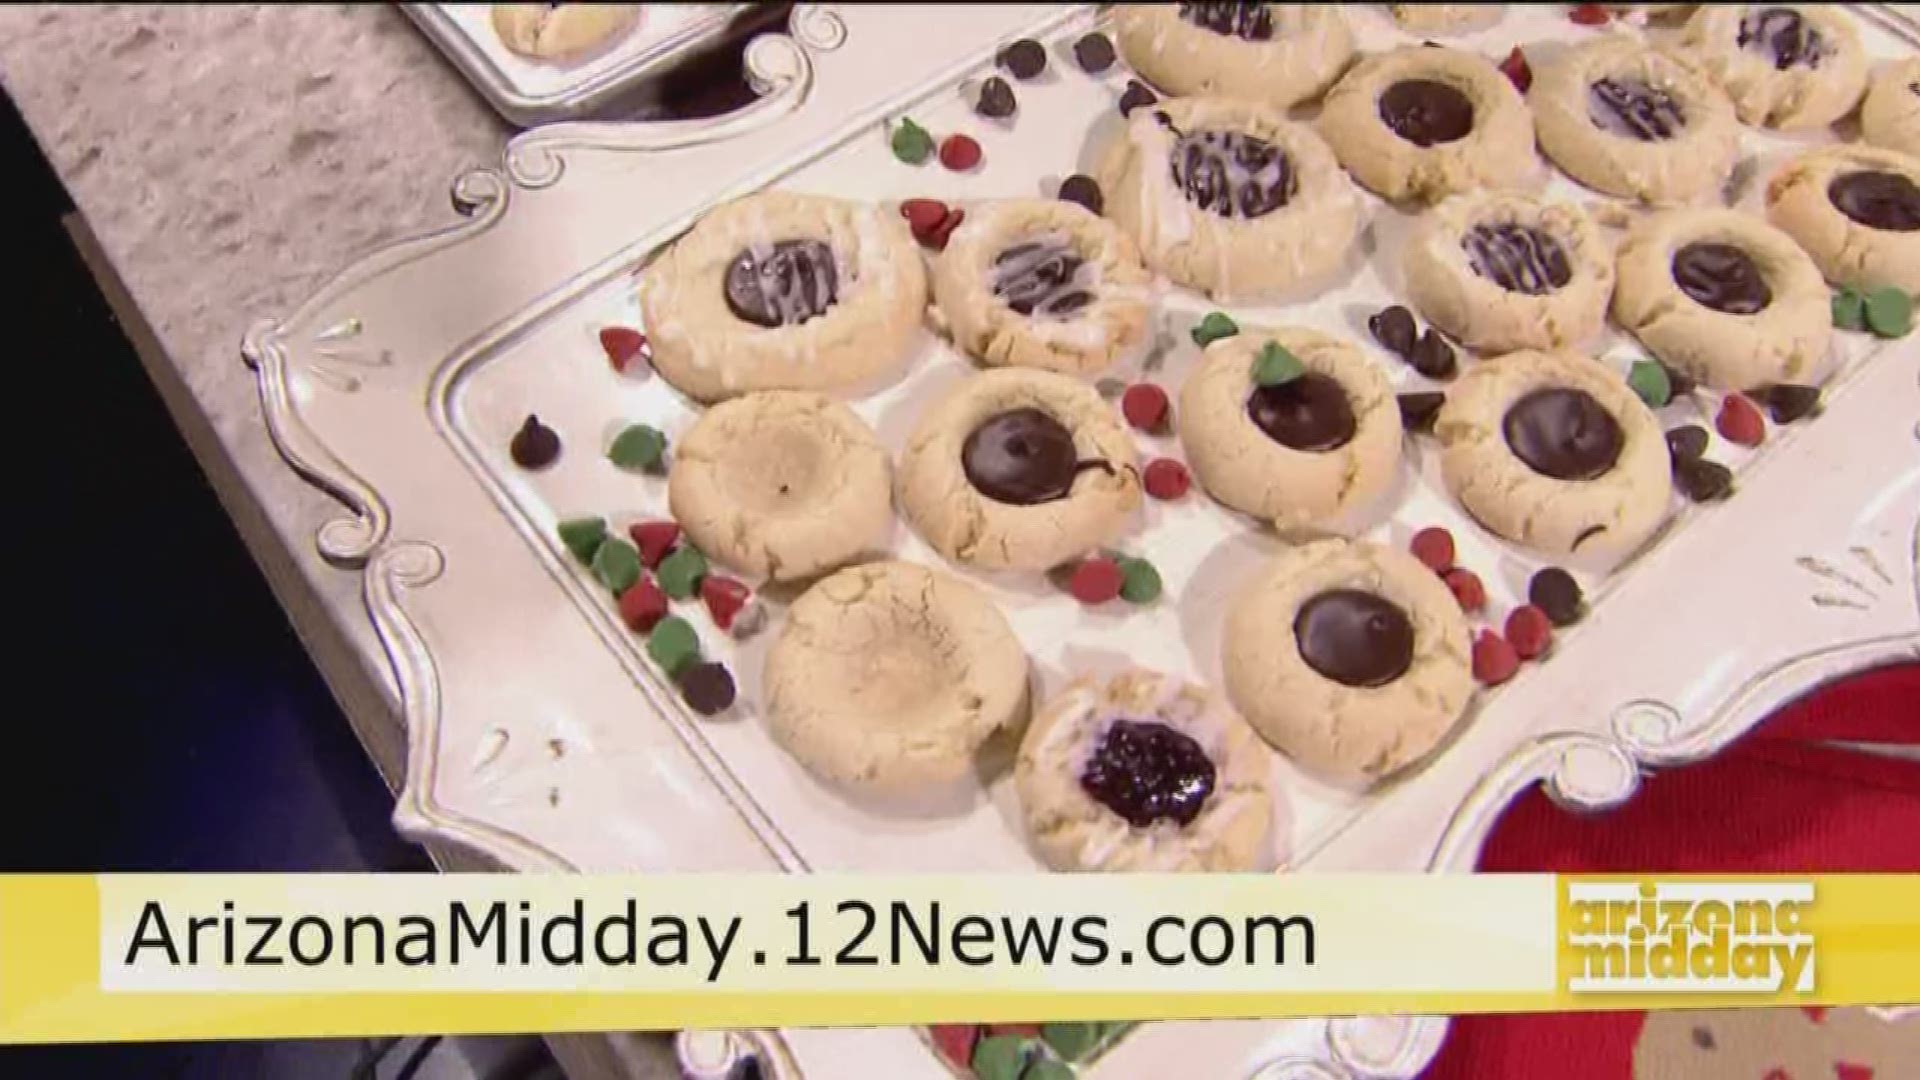 One of the most popular cookies through the decades has been the the Thumbprint cookie. Jan's in the kitchen giving us the step by step!